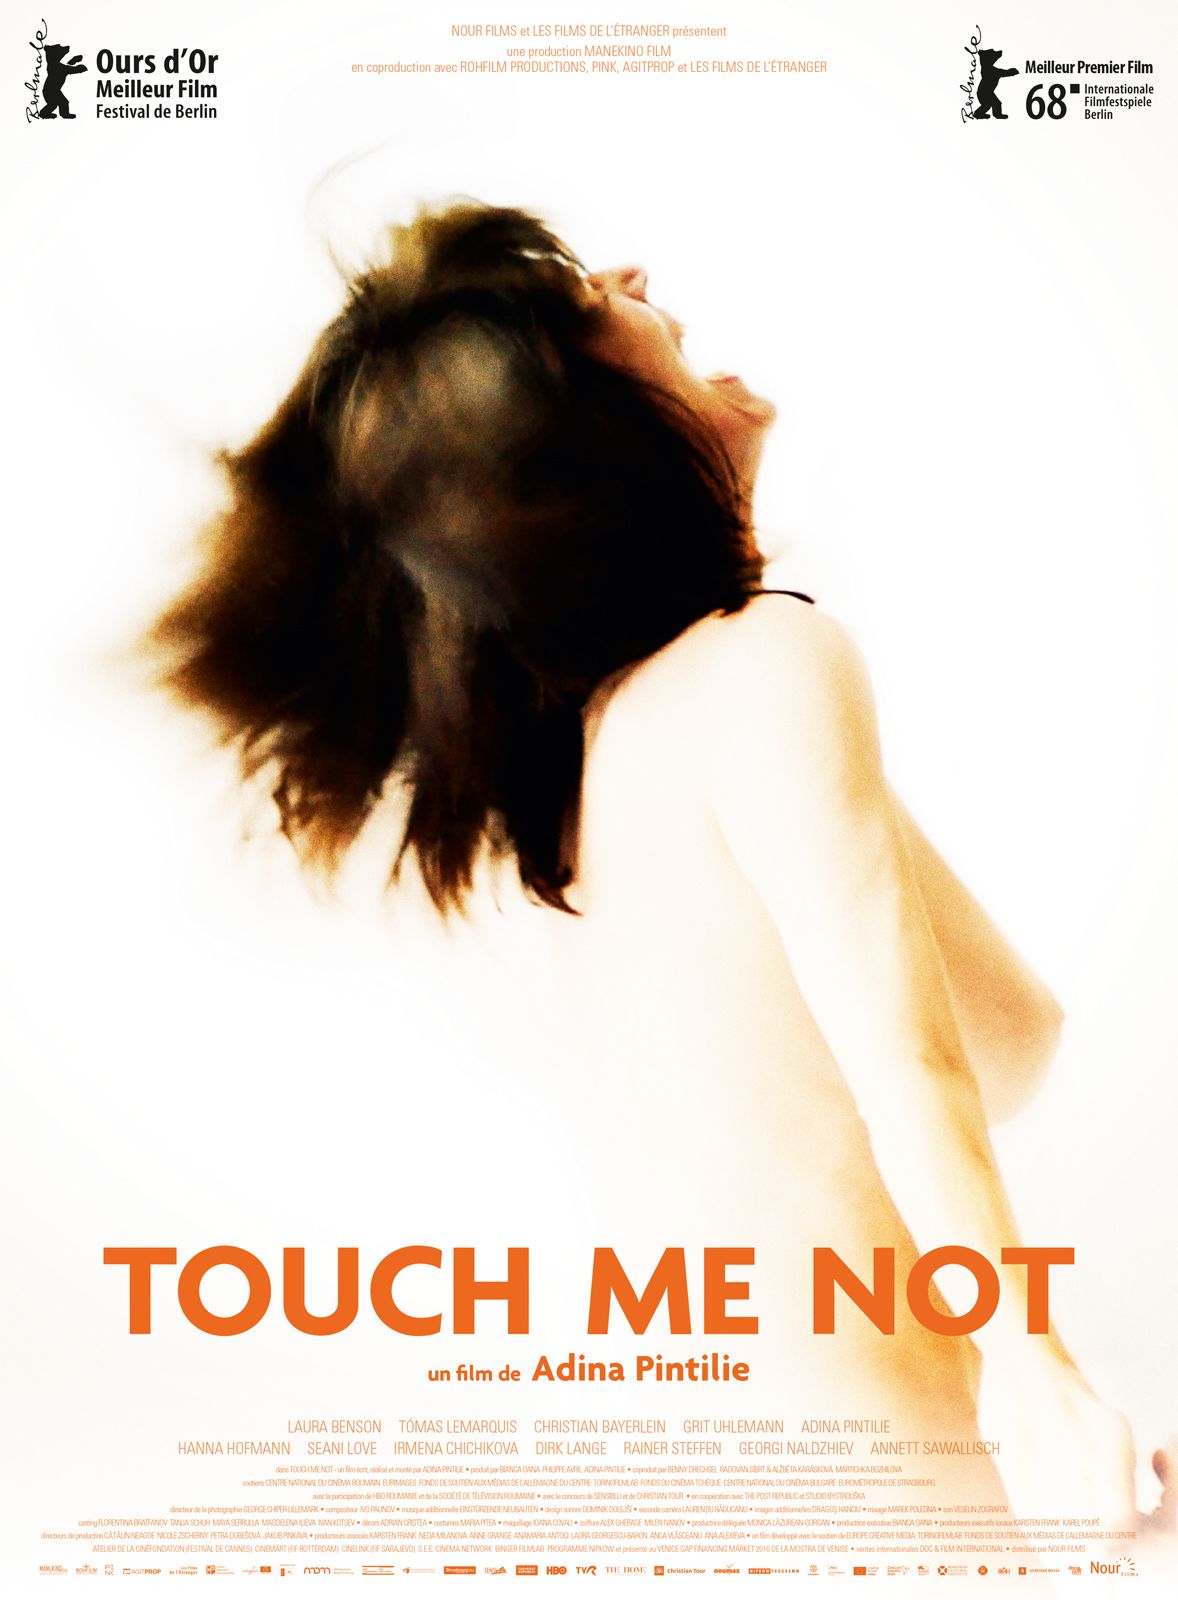 Touch Me Not - Film (2018) streaming VF gratuit complet